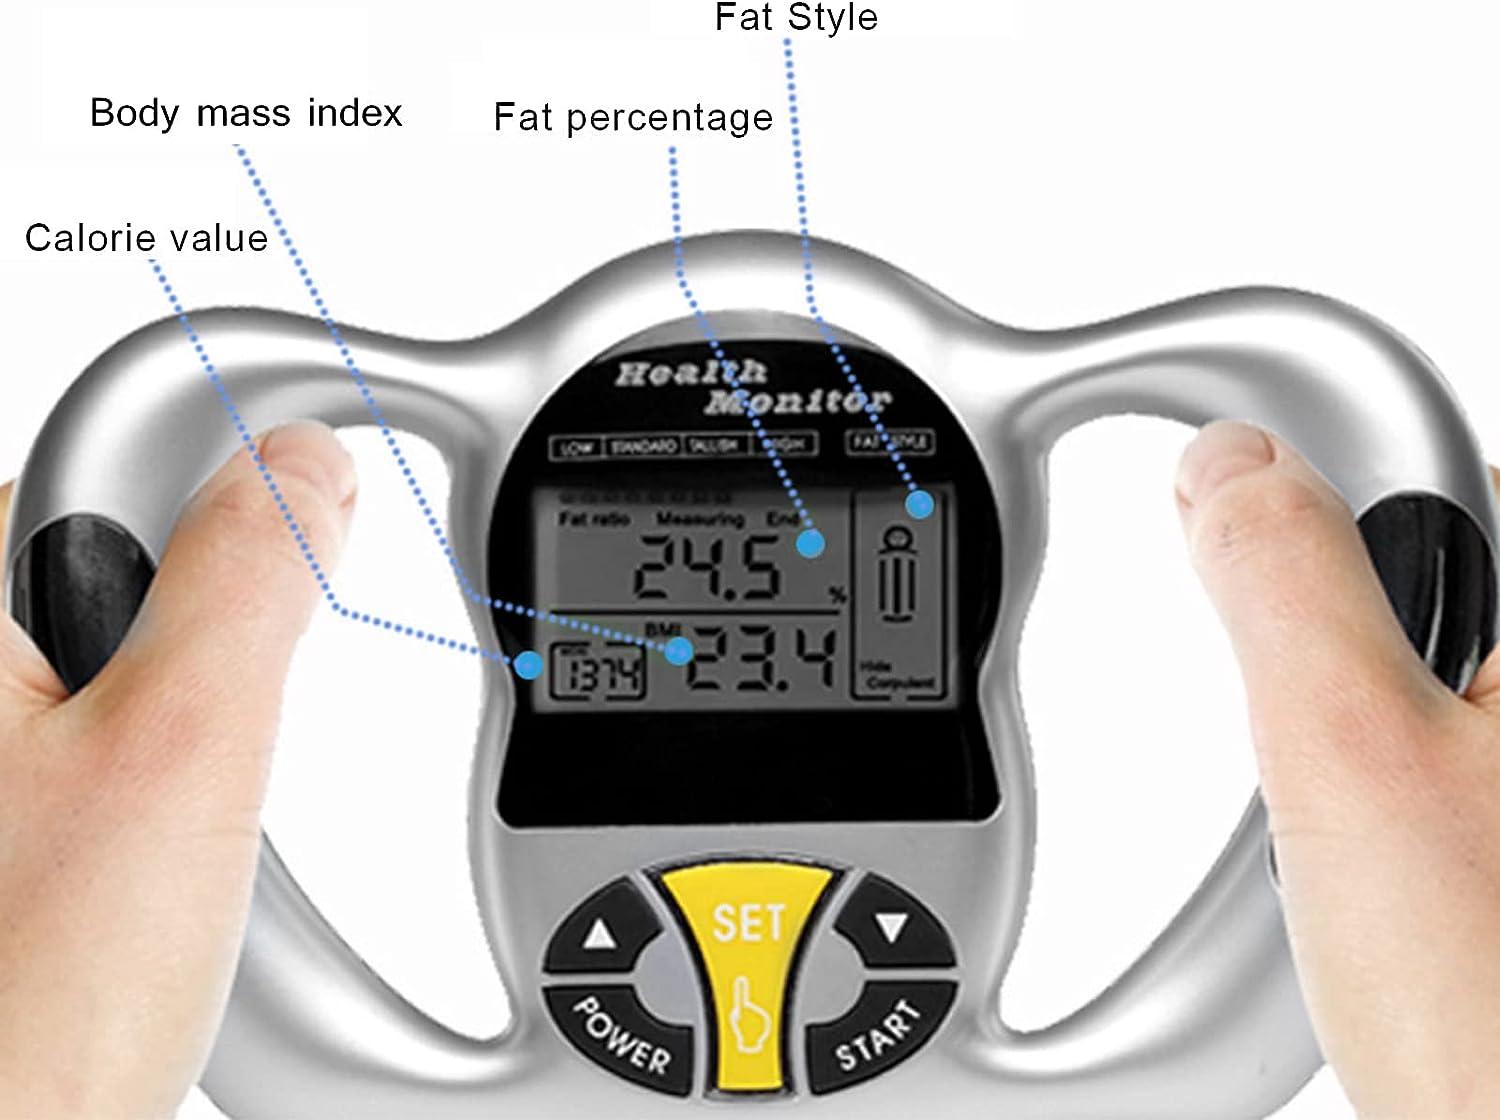 Portable Body Fat Monitor, Remember Information Handheld Digital Fat  Analyzer Calorie Measurement Weight Loss Accurate Data for Workout